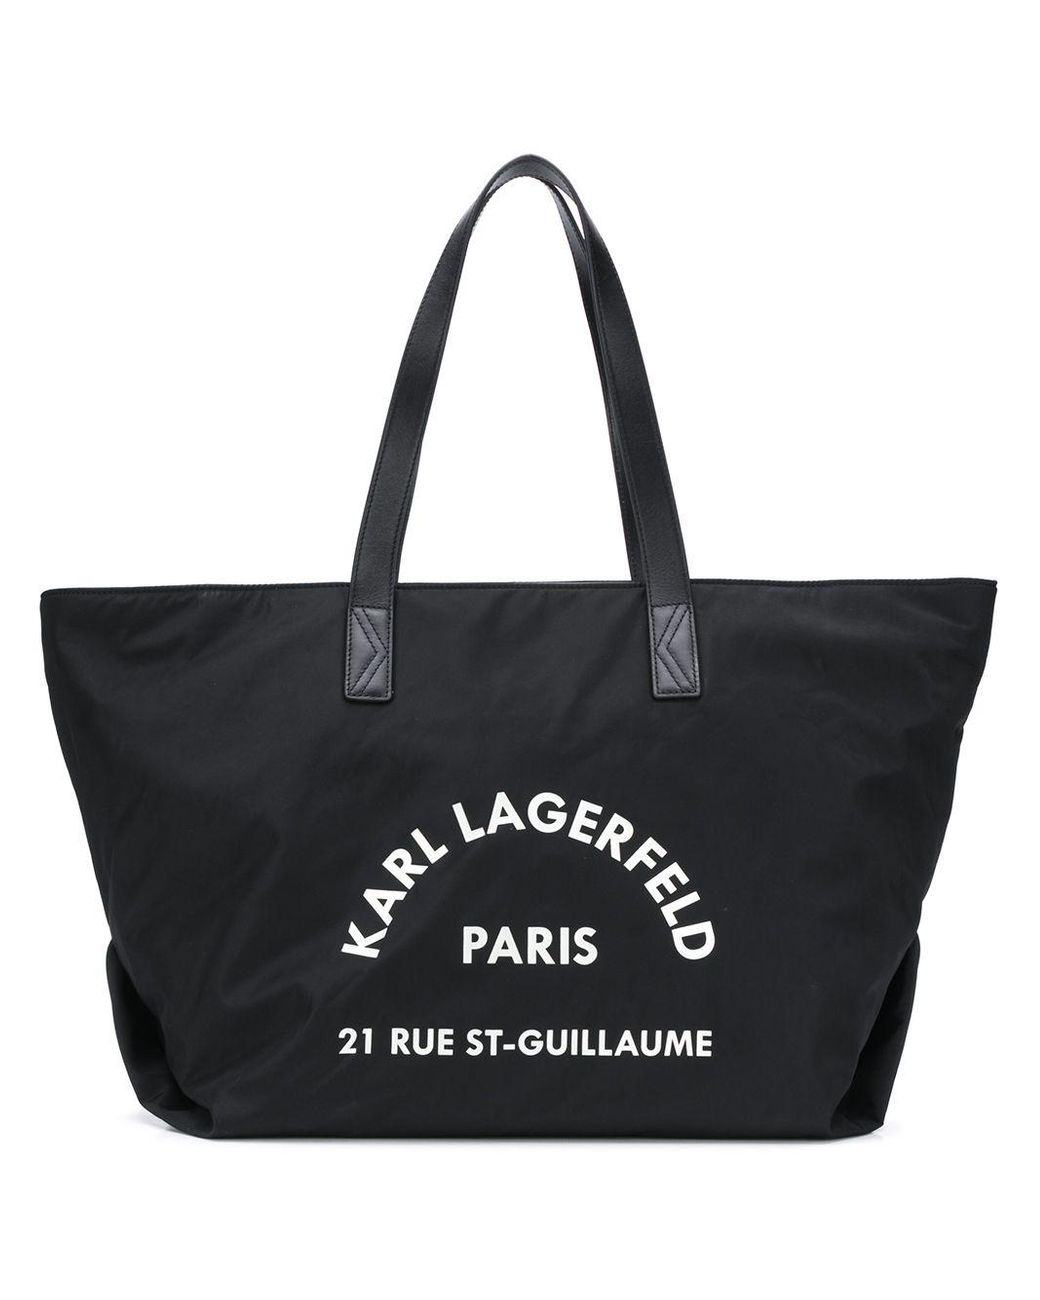 Karl Lagerfeld Canvas Rue St Guillaume Tote Bag in Black - Save 74% - Lyst